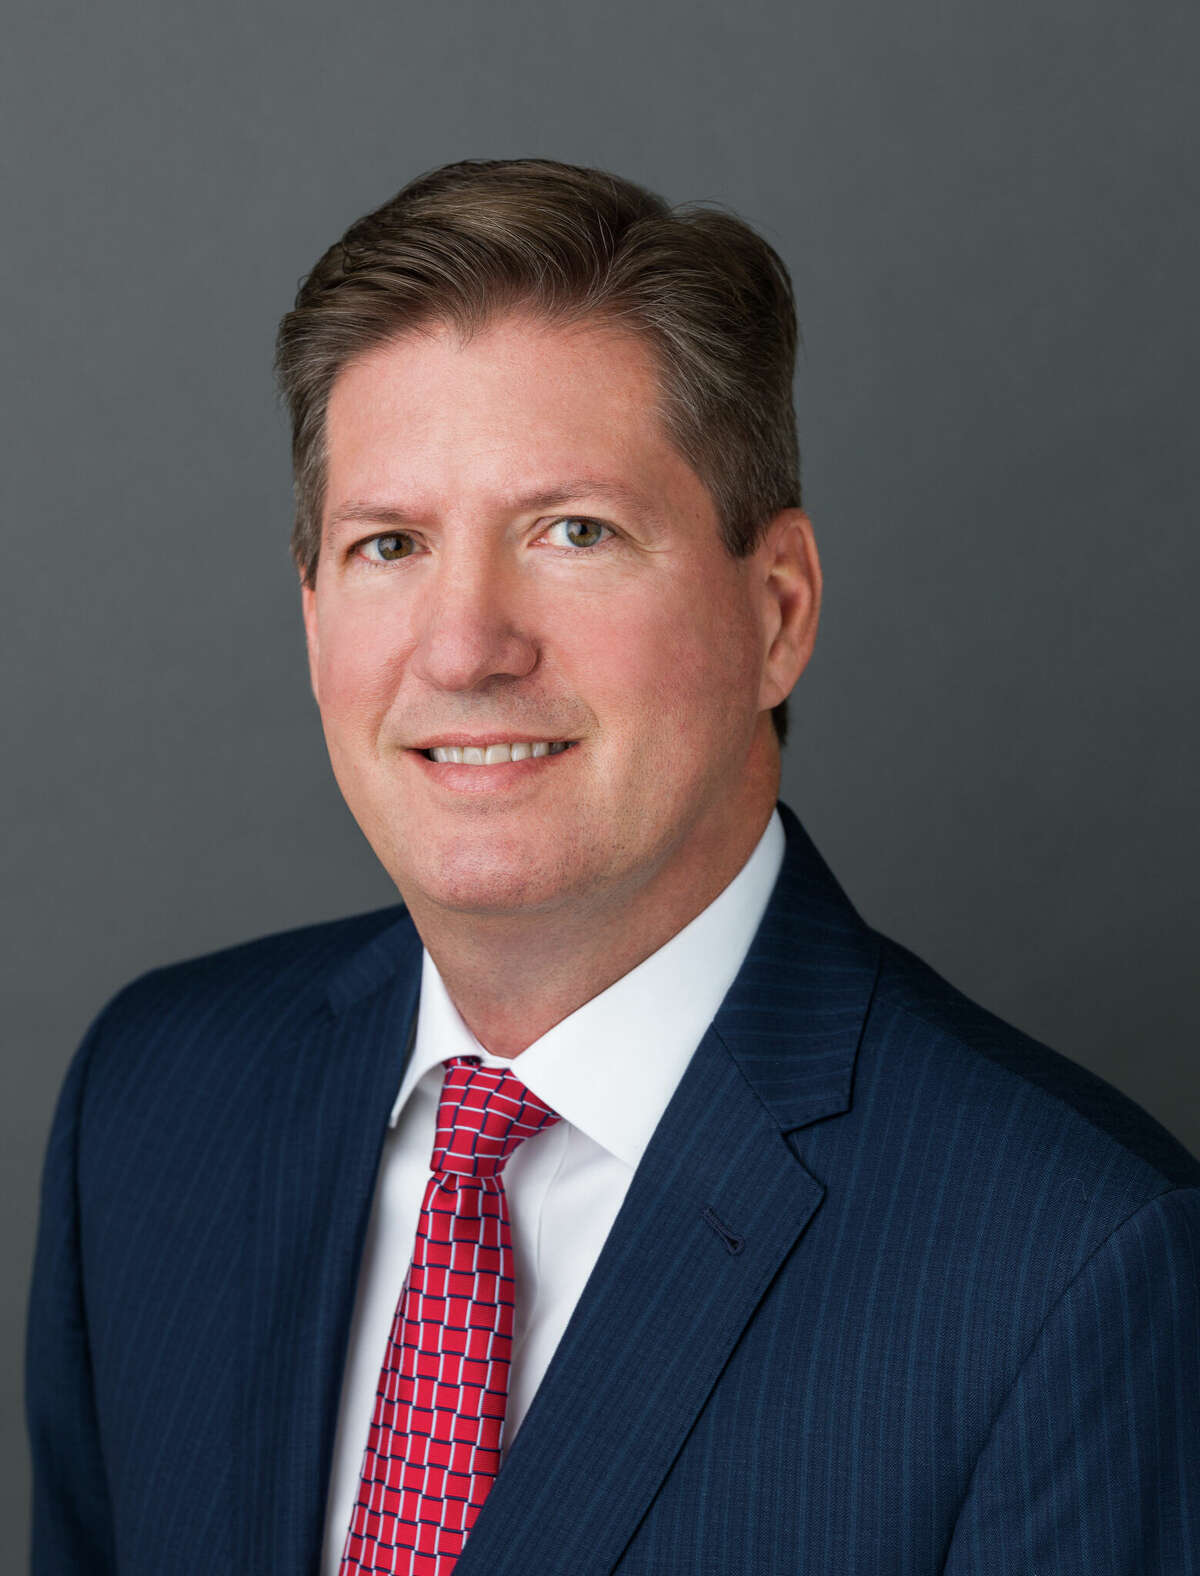 Michael J. Smith, took over as chief executive officer of Houston-based Johnson Development in early February 2022.